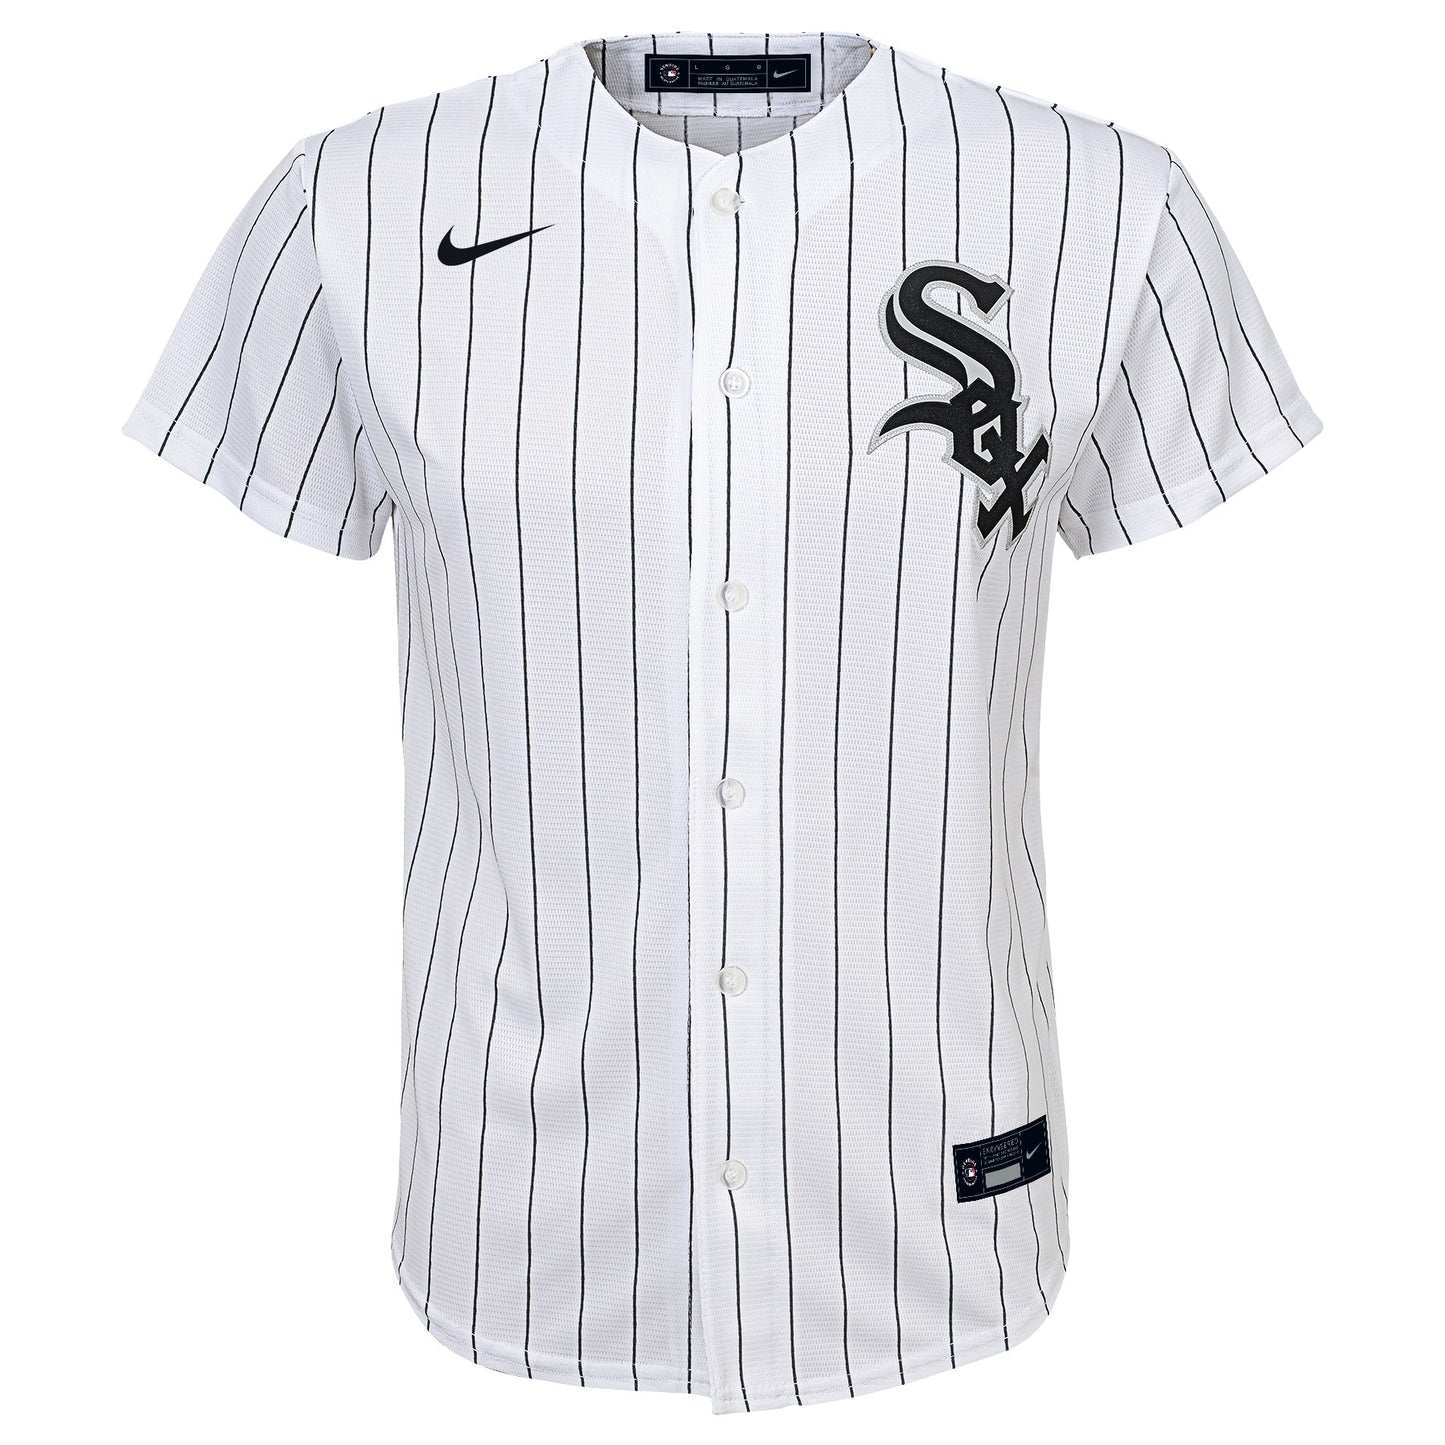 Infant Luis Robert Chicago White Sox Nike Home White Replica Team Jersey